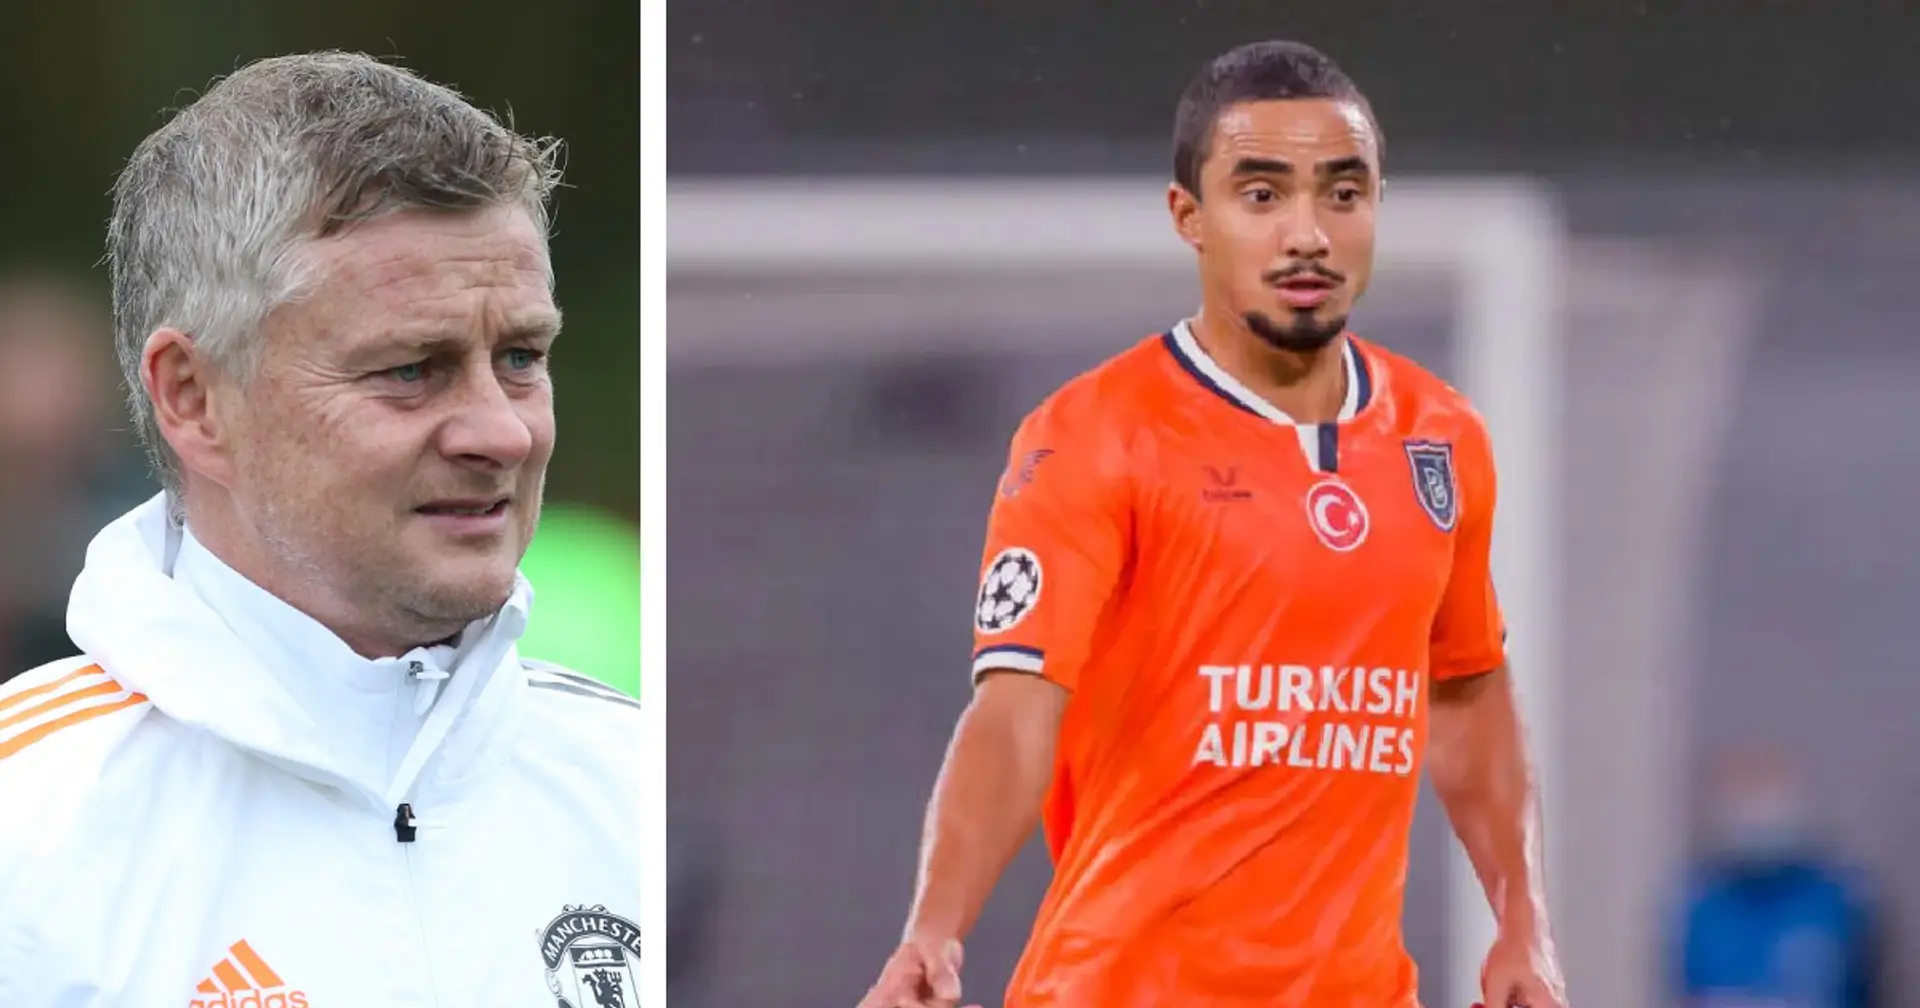 'It will be a great reunion with Rafael': Ole ahead of facing Istanbul Basaksehir